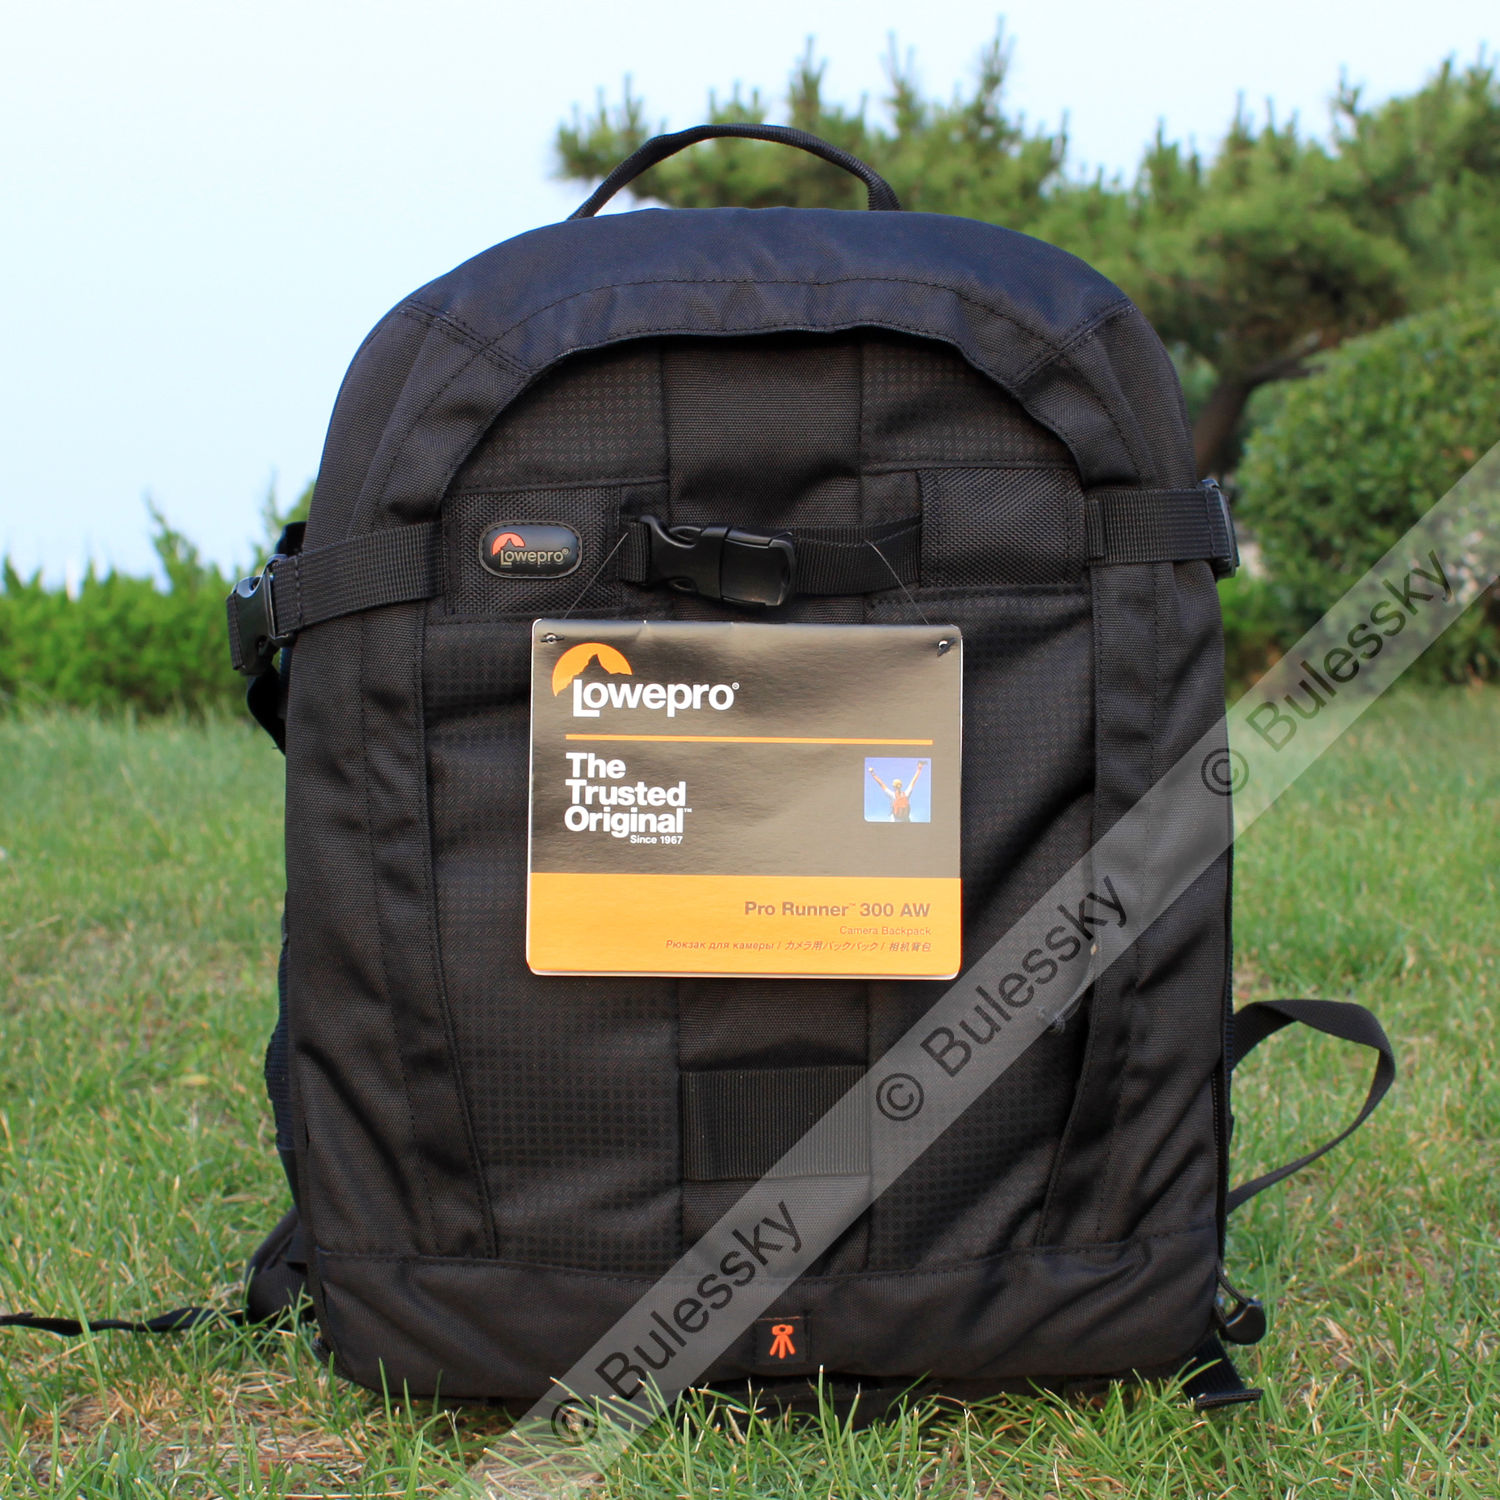 Lowepro Pro Runner 300 AW DSLR Camera Bag Backpack Case With All Weather Cover BC27252 รูปที่ 1